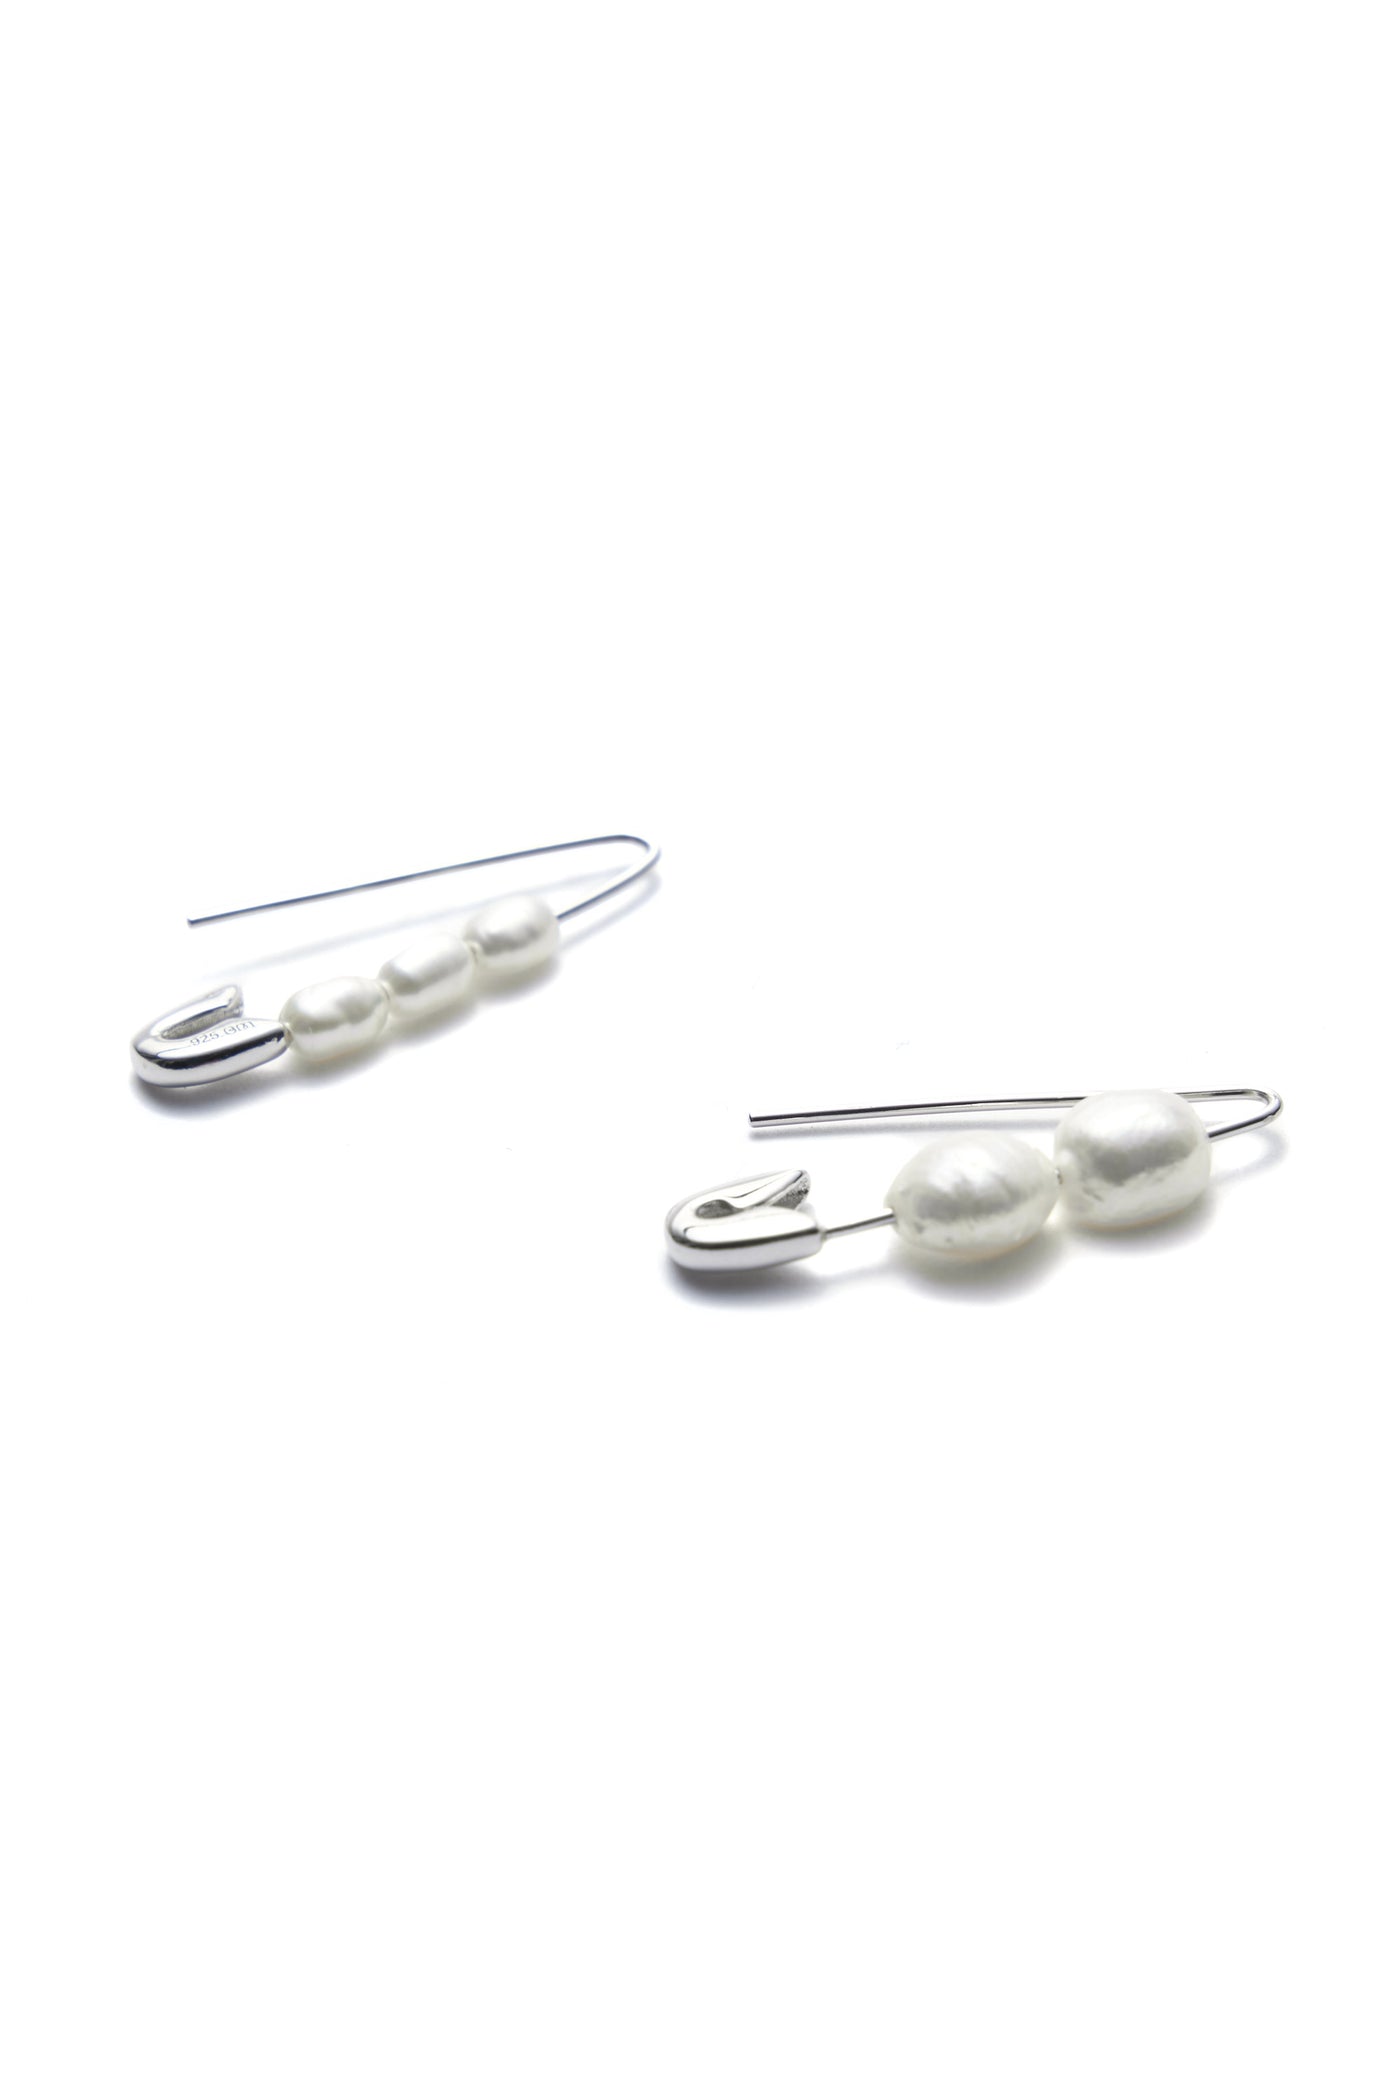 Bianca Mavrick Jewellery Safety Pin Earring Sterling Silver Mismatched Pearls Side View